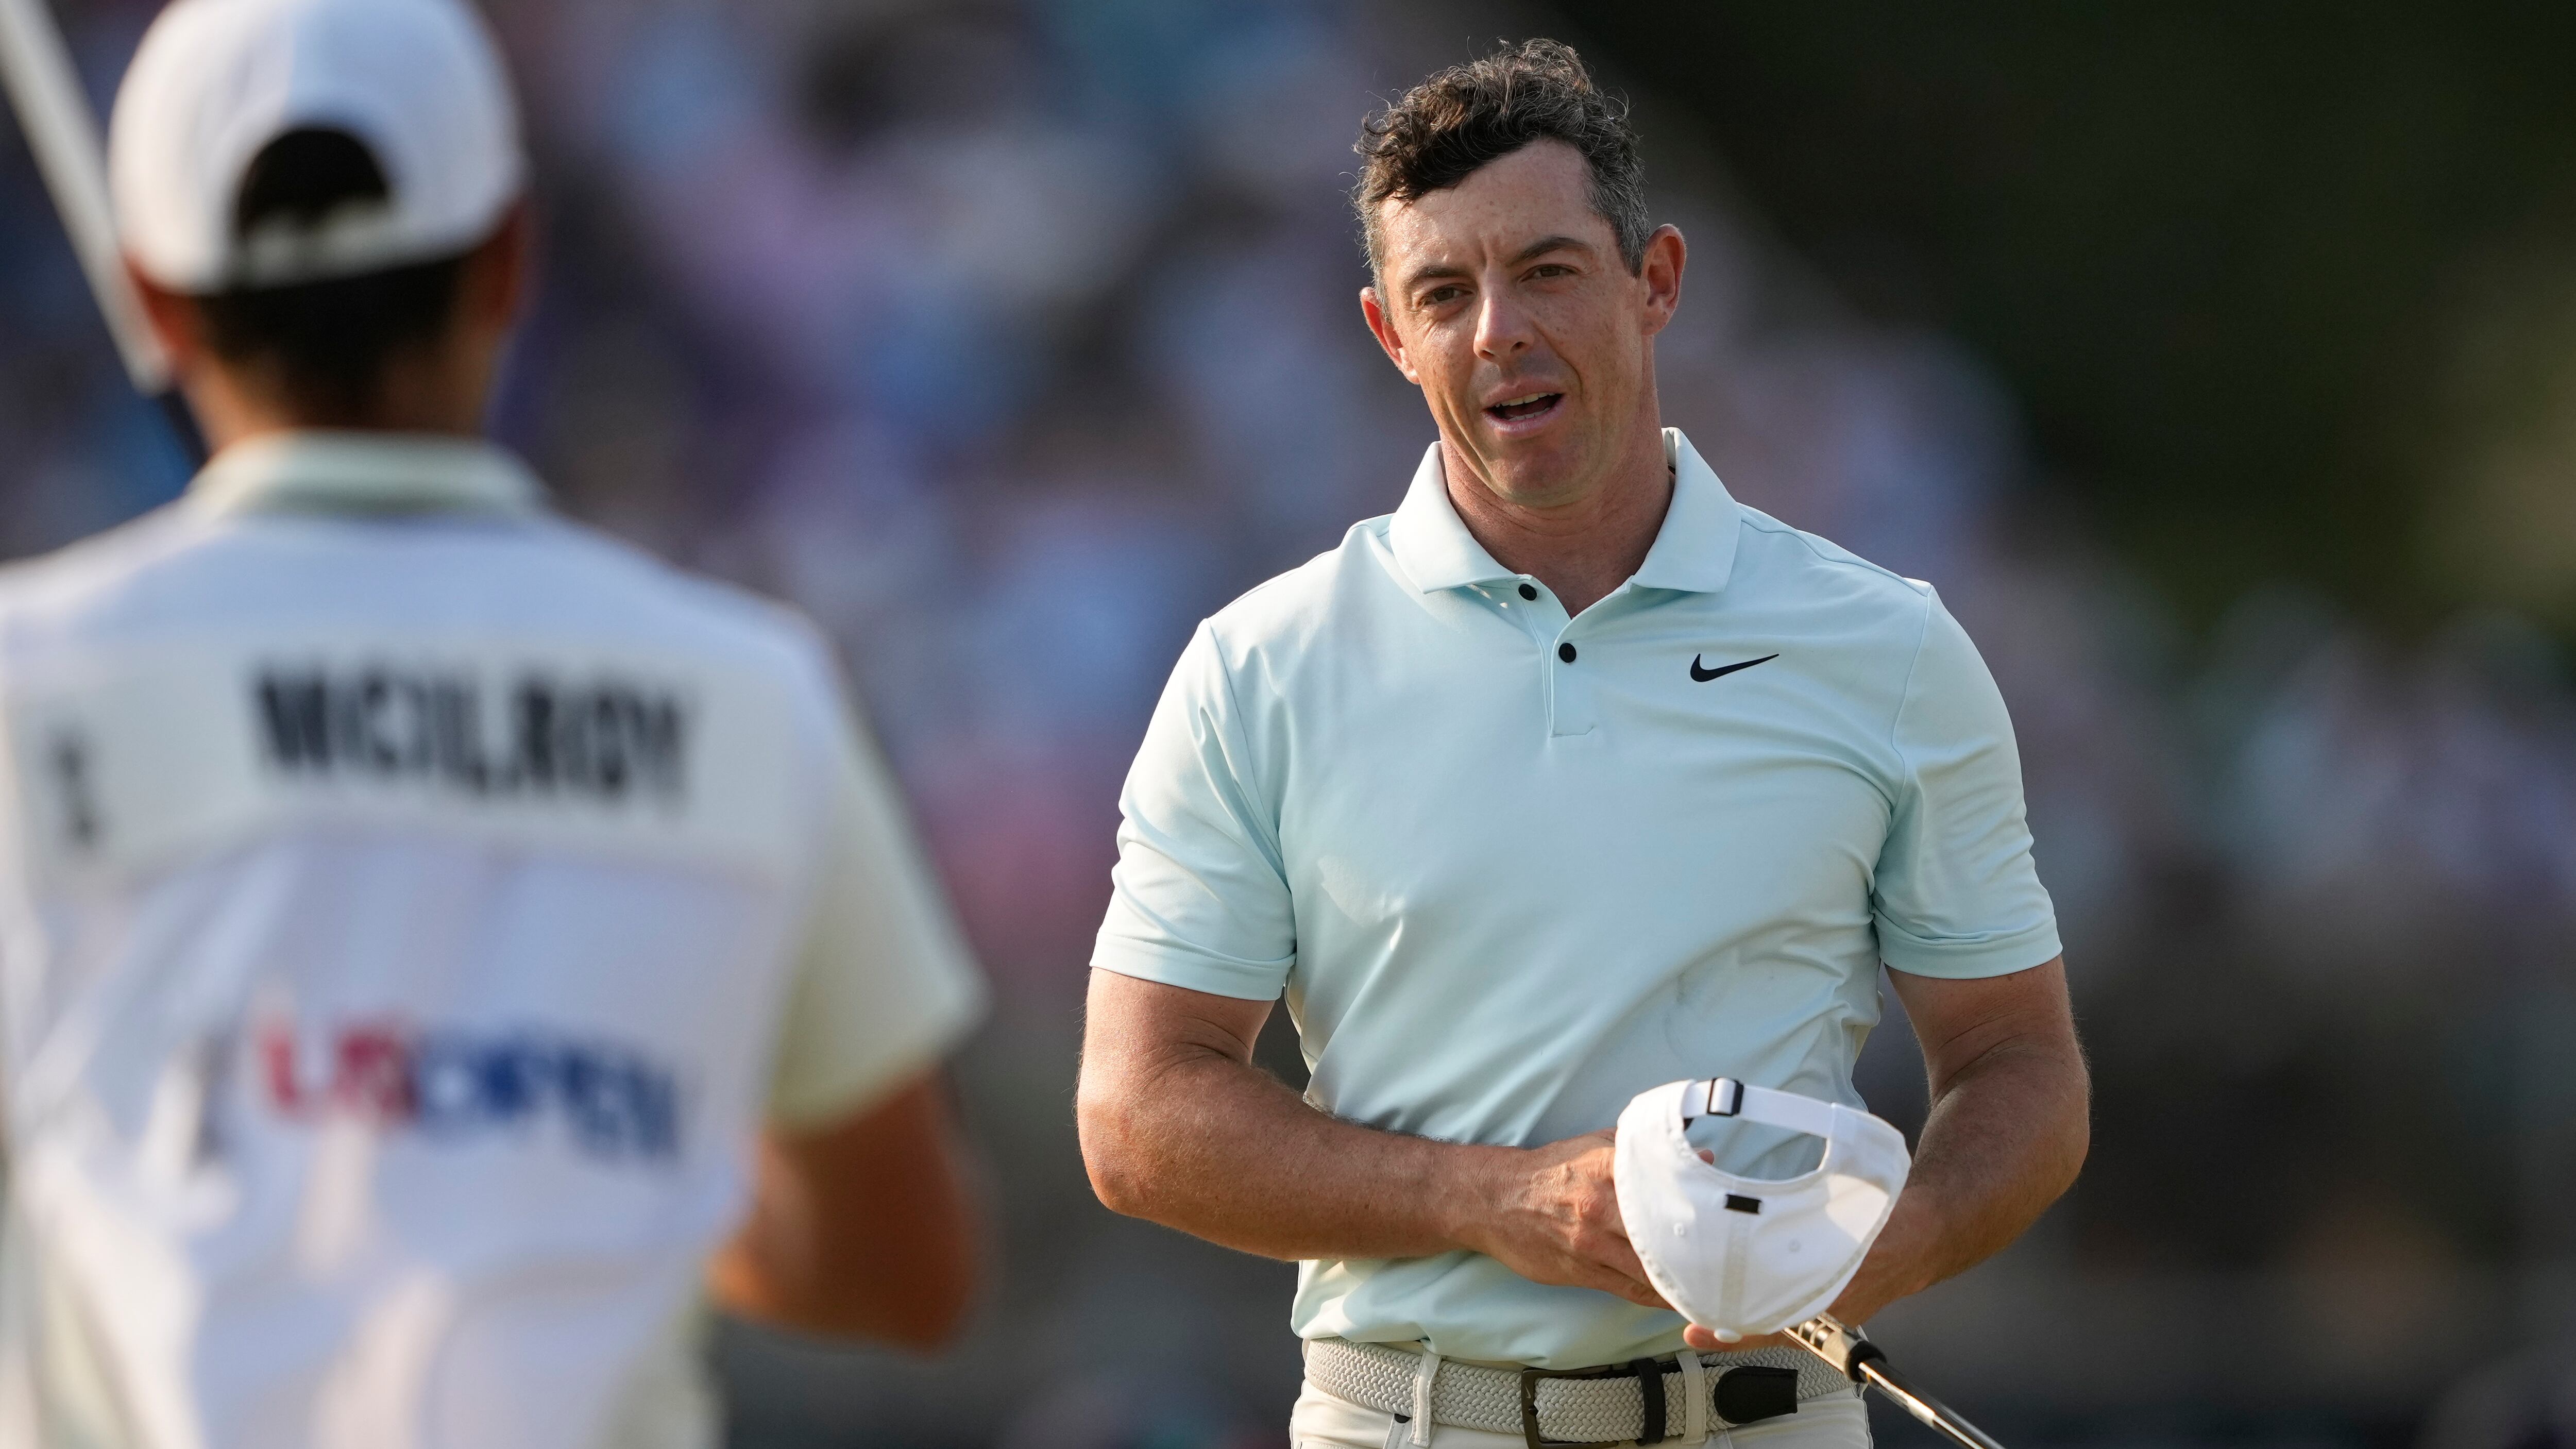 Rory McIlroy bogeyed three of the last four holes to squander his best chance of a major title since 2014 (Matt York/AP)